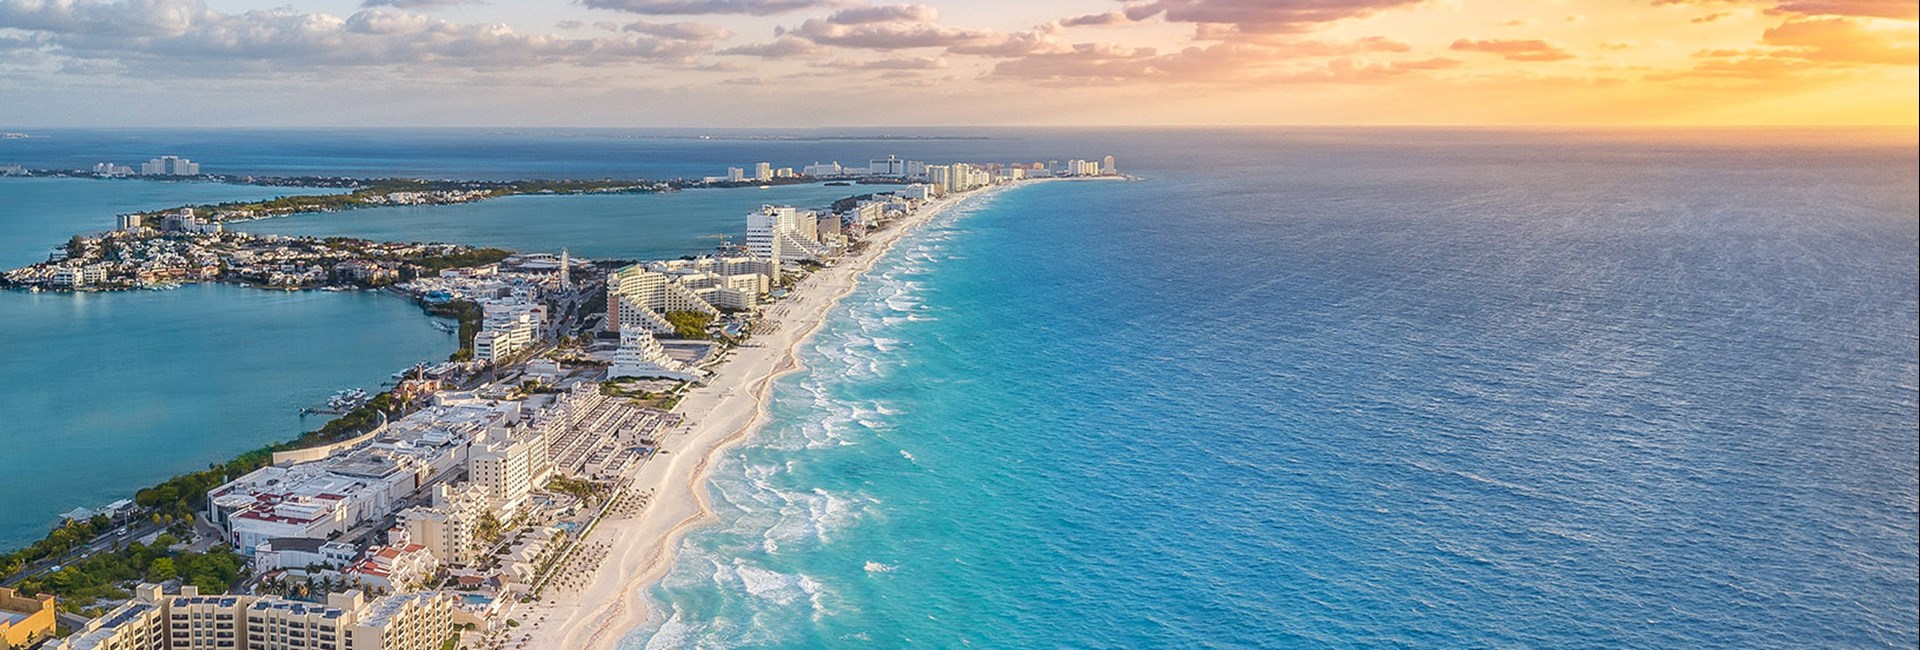 Aerial view of Cancun coast with sun setting over the sea in the distance